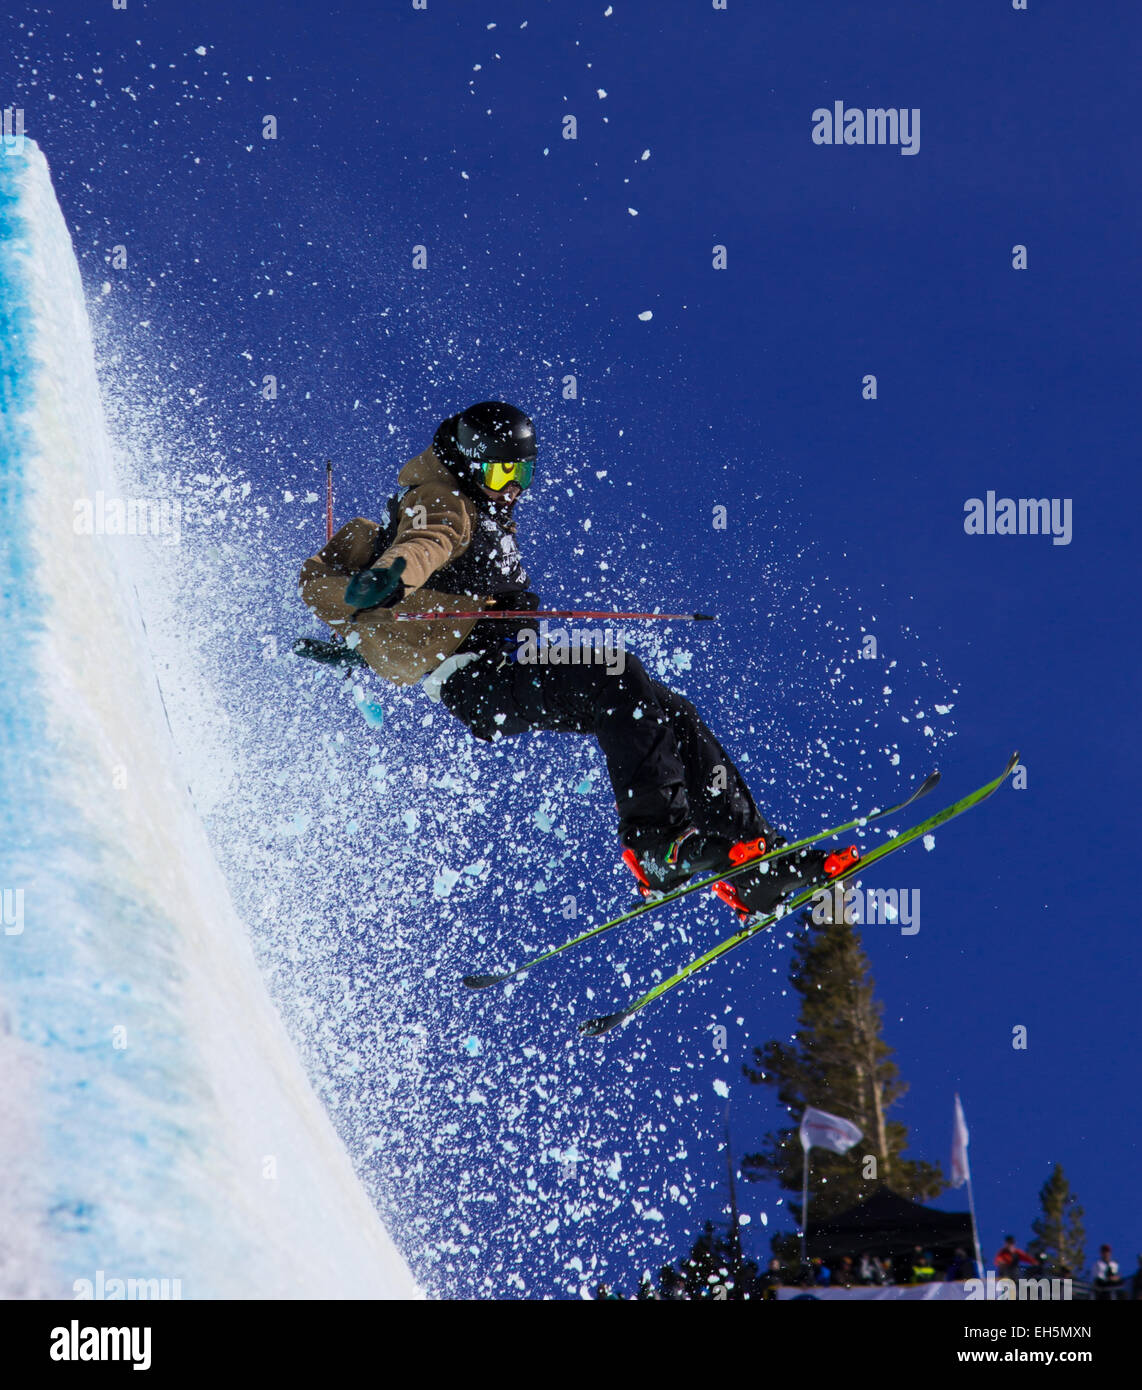 A skier competitor in the Revolutionary tour half pipe competition, Mammoth Mountain,California. Stock Photo